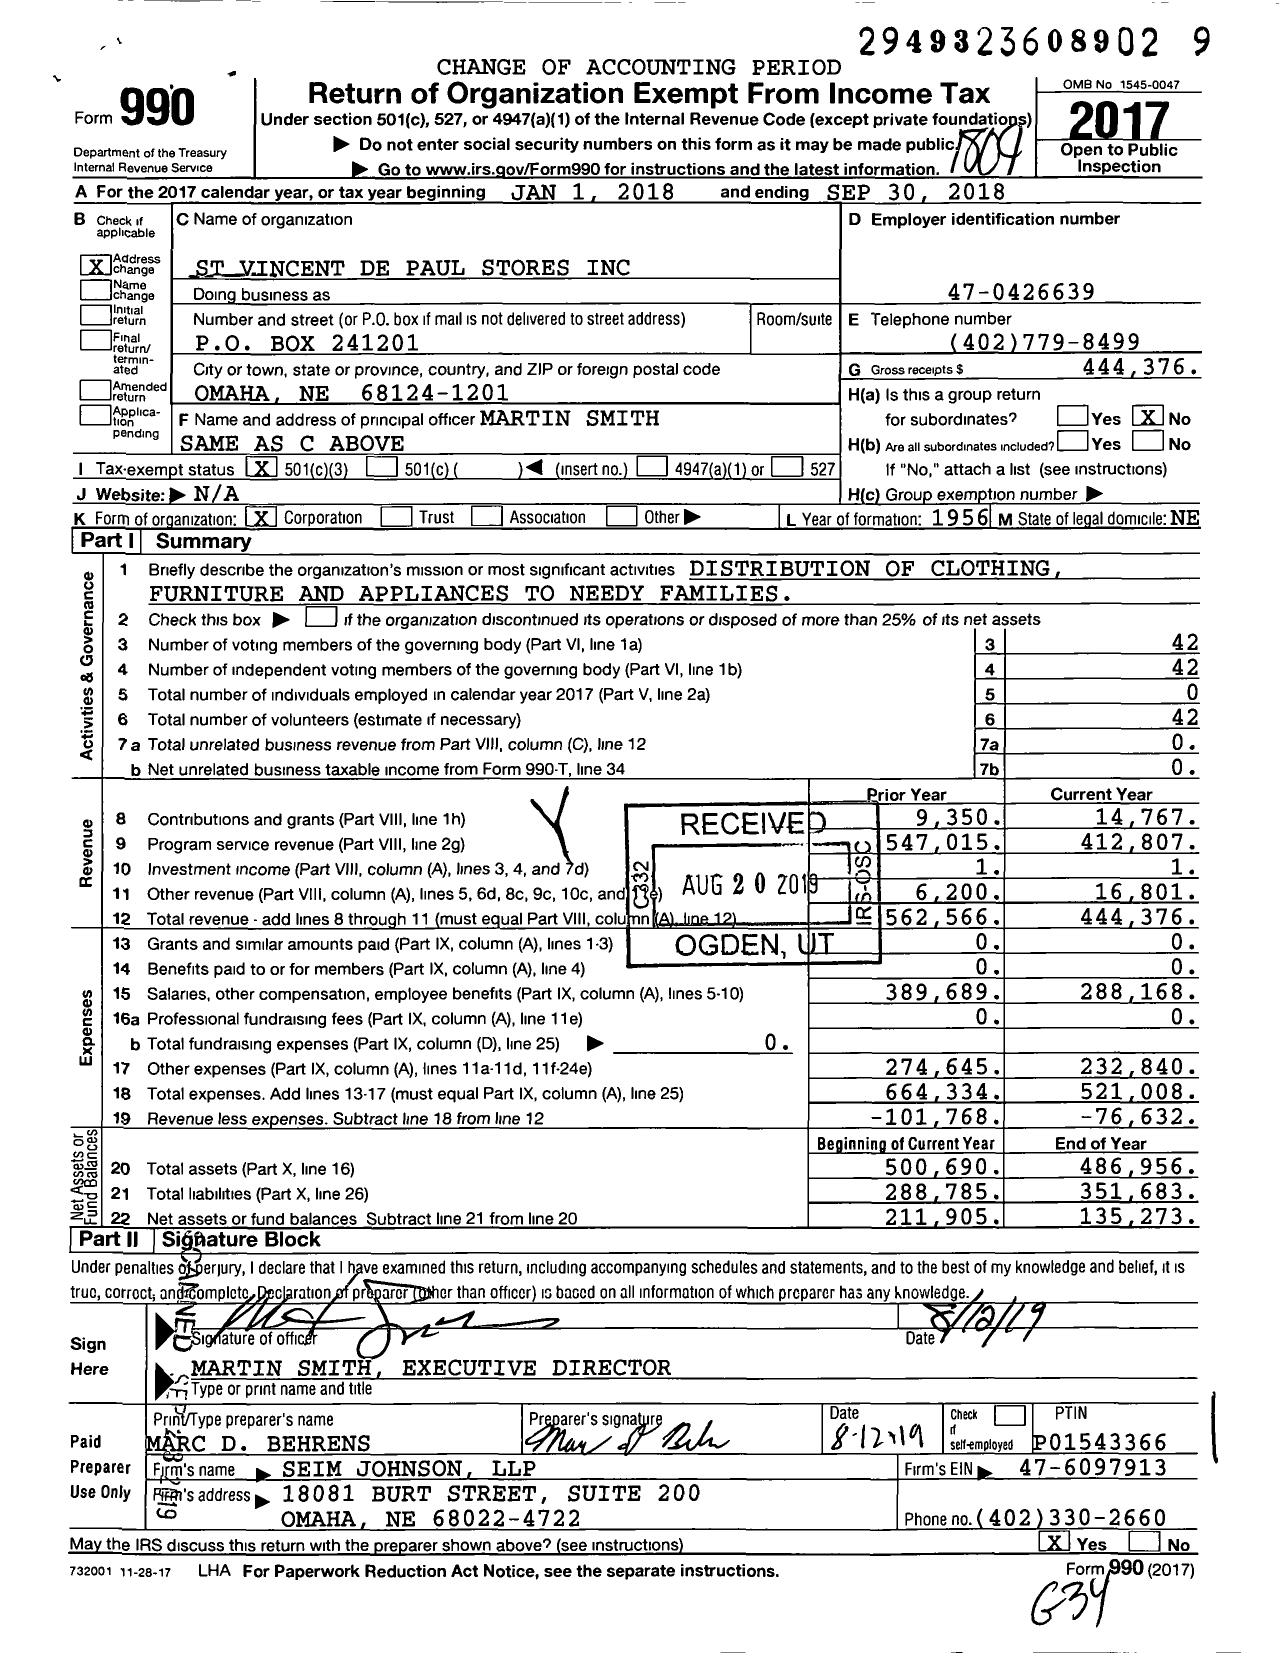 Image of first page of 2017 Form 990 for St Vincent de Paul Stores